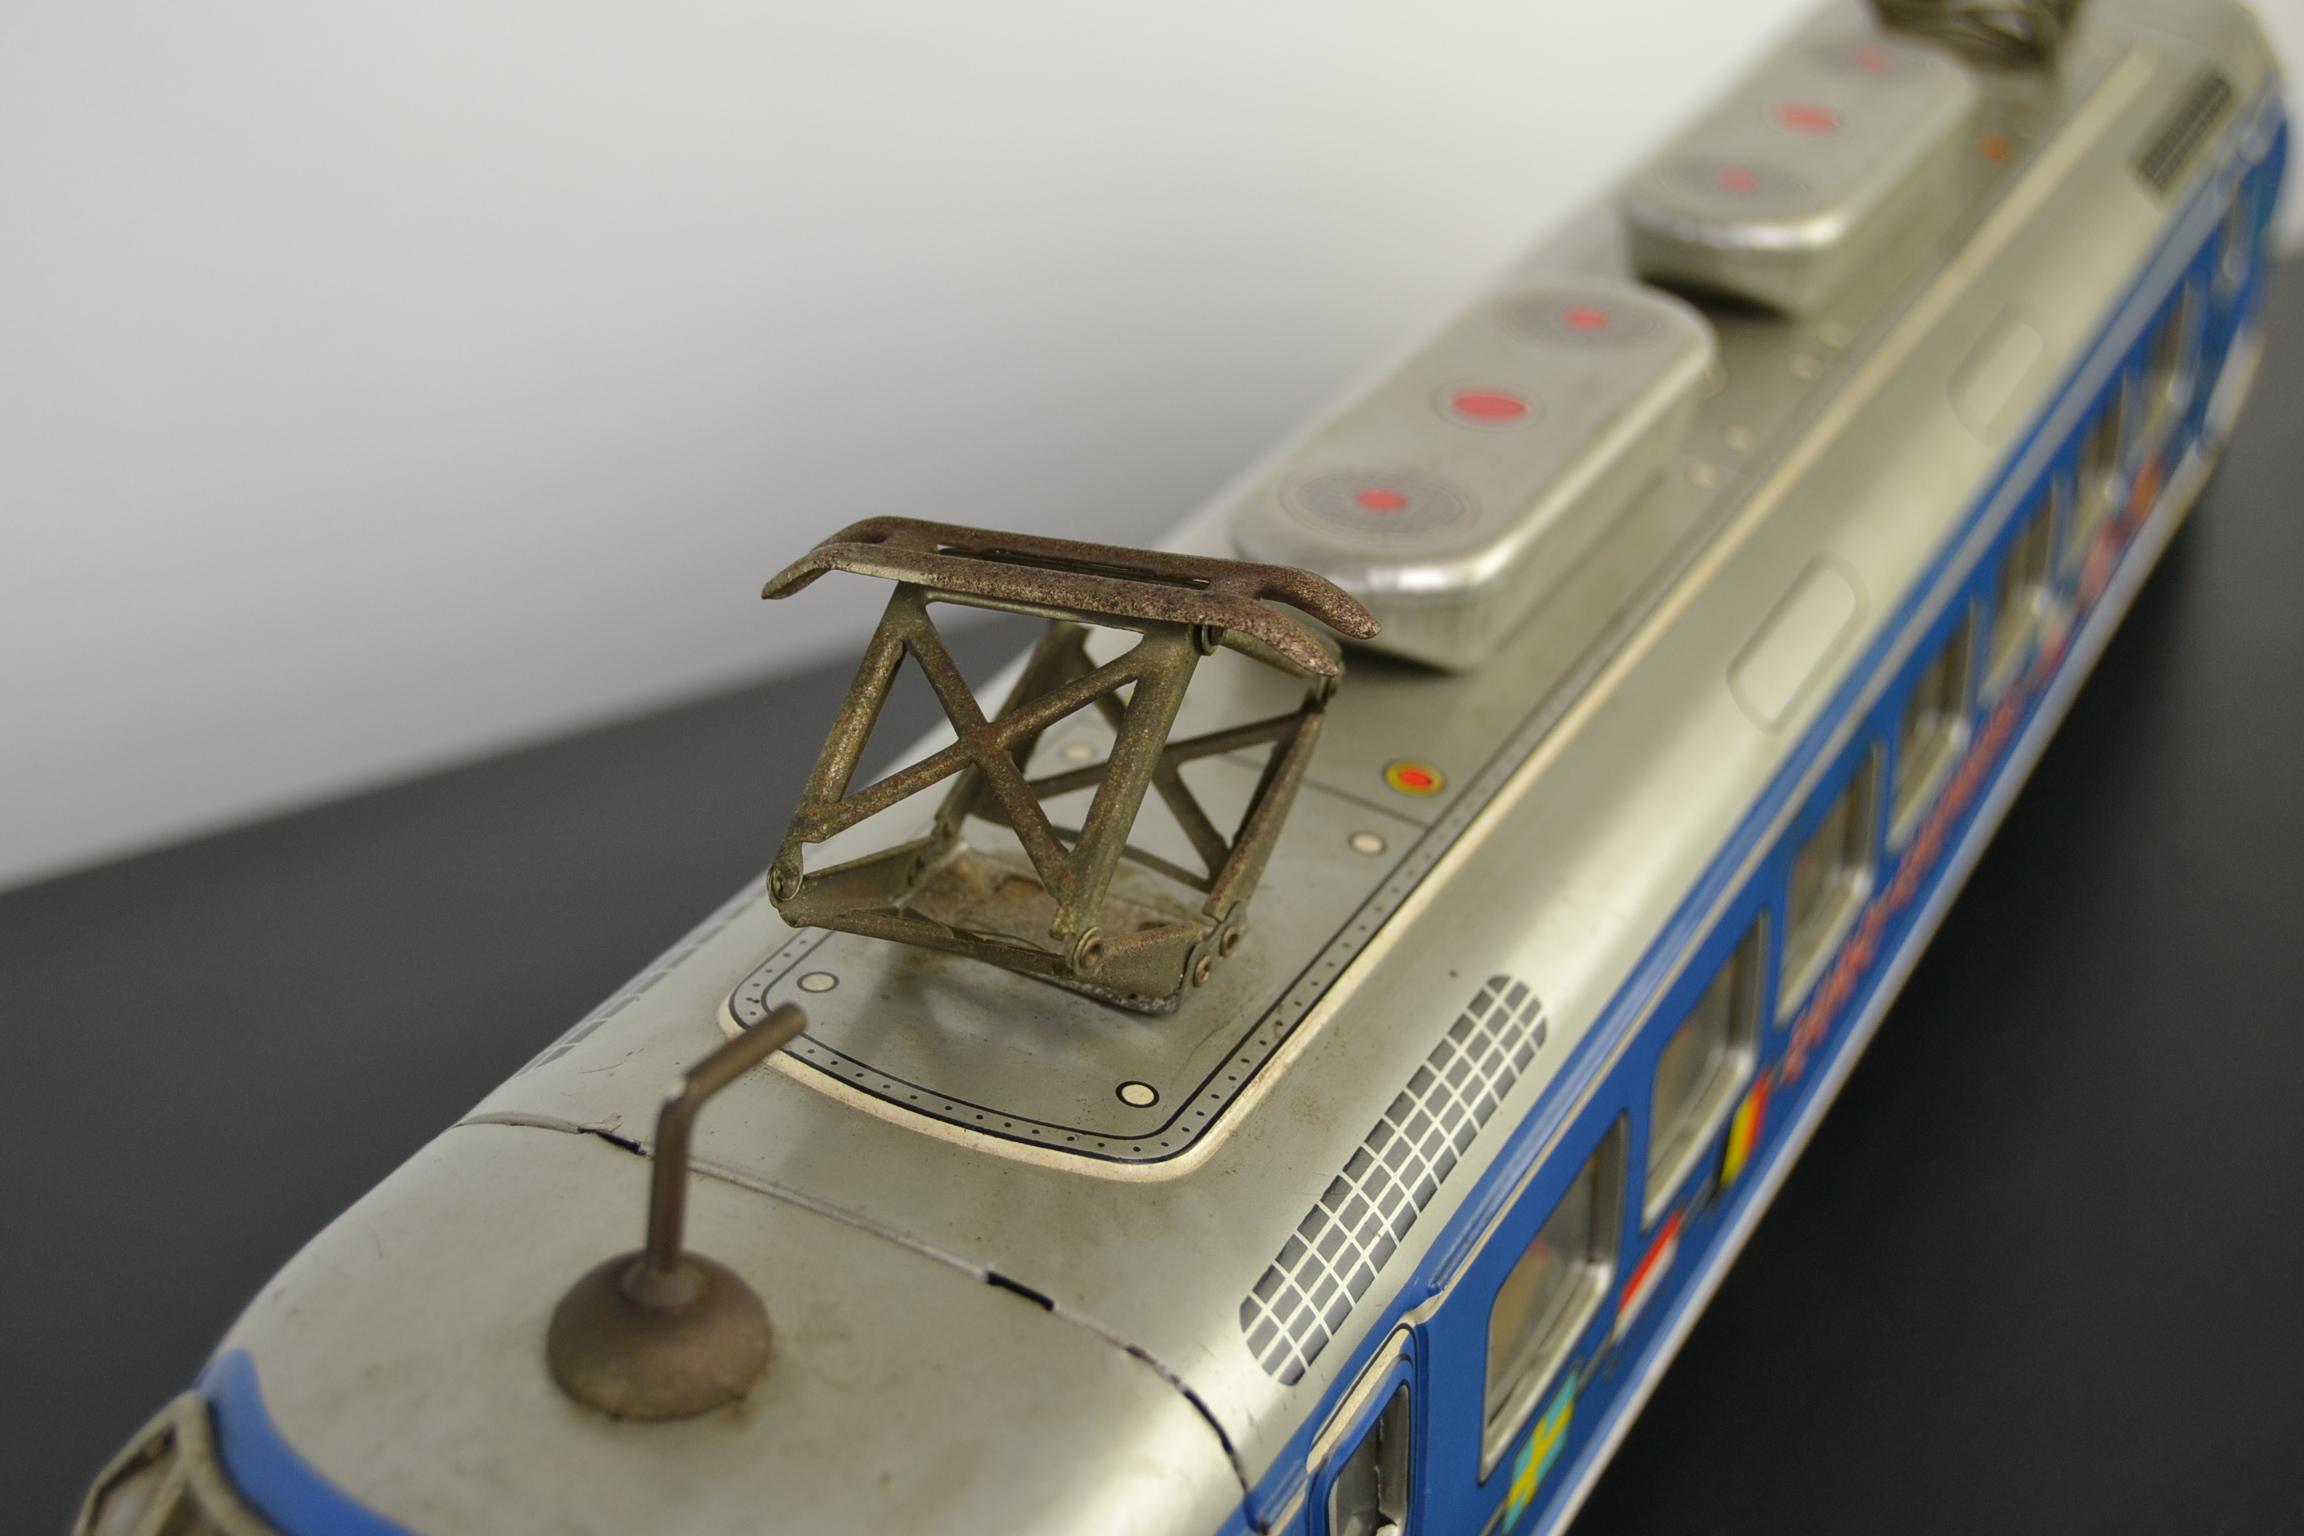 20th Century Large Tin Friction Drive, Express Train Toy by ATC, Japan, 1950s